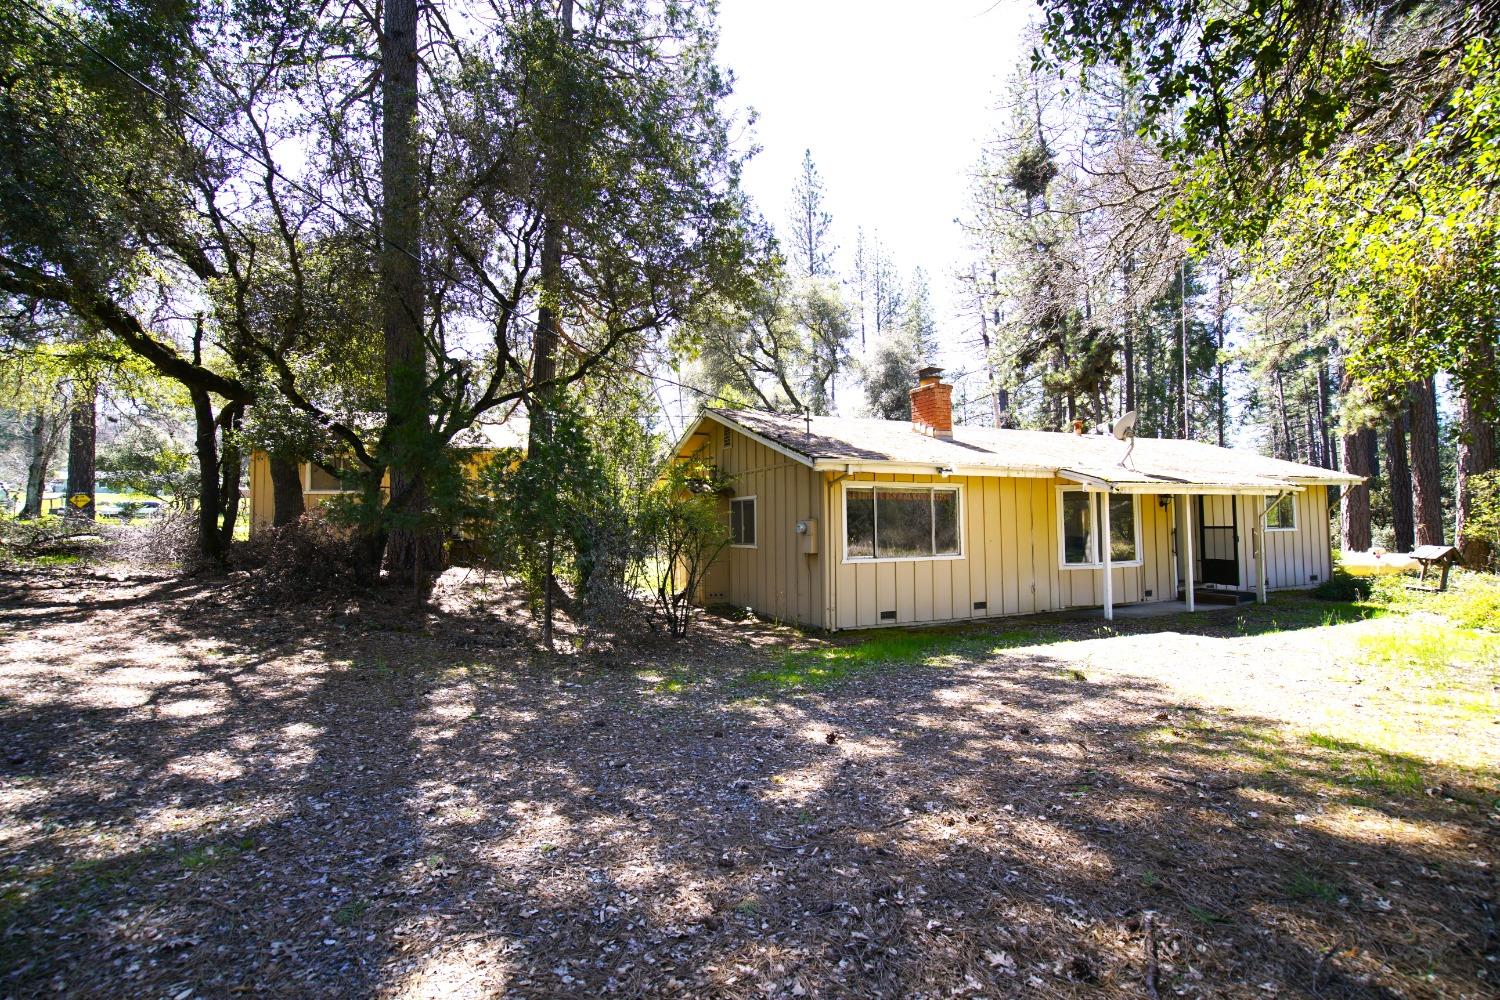 Photo of 10806 Beckville Rd in Nevada City, CA